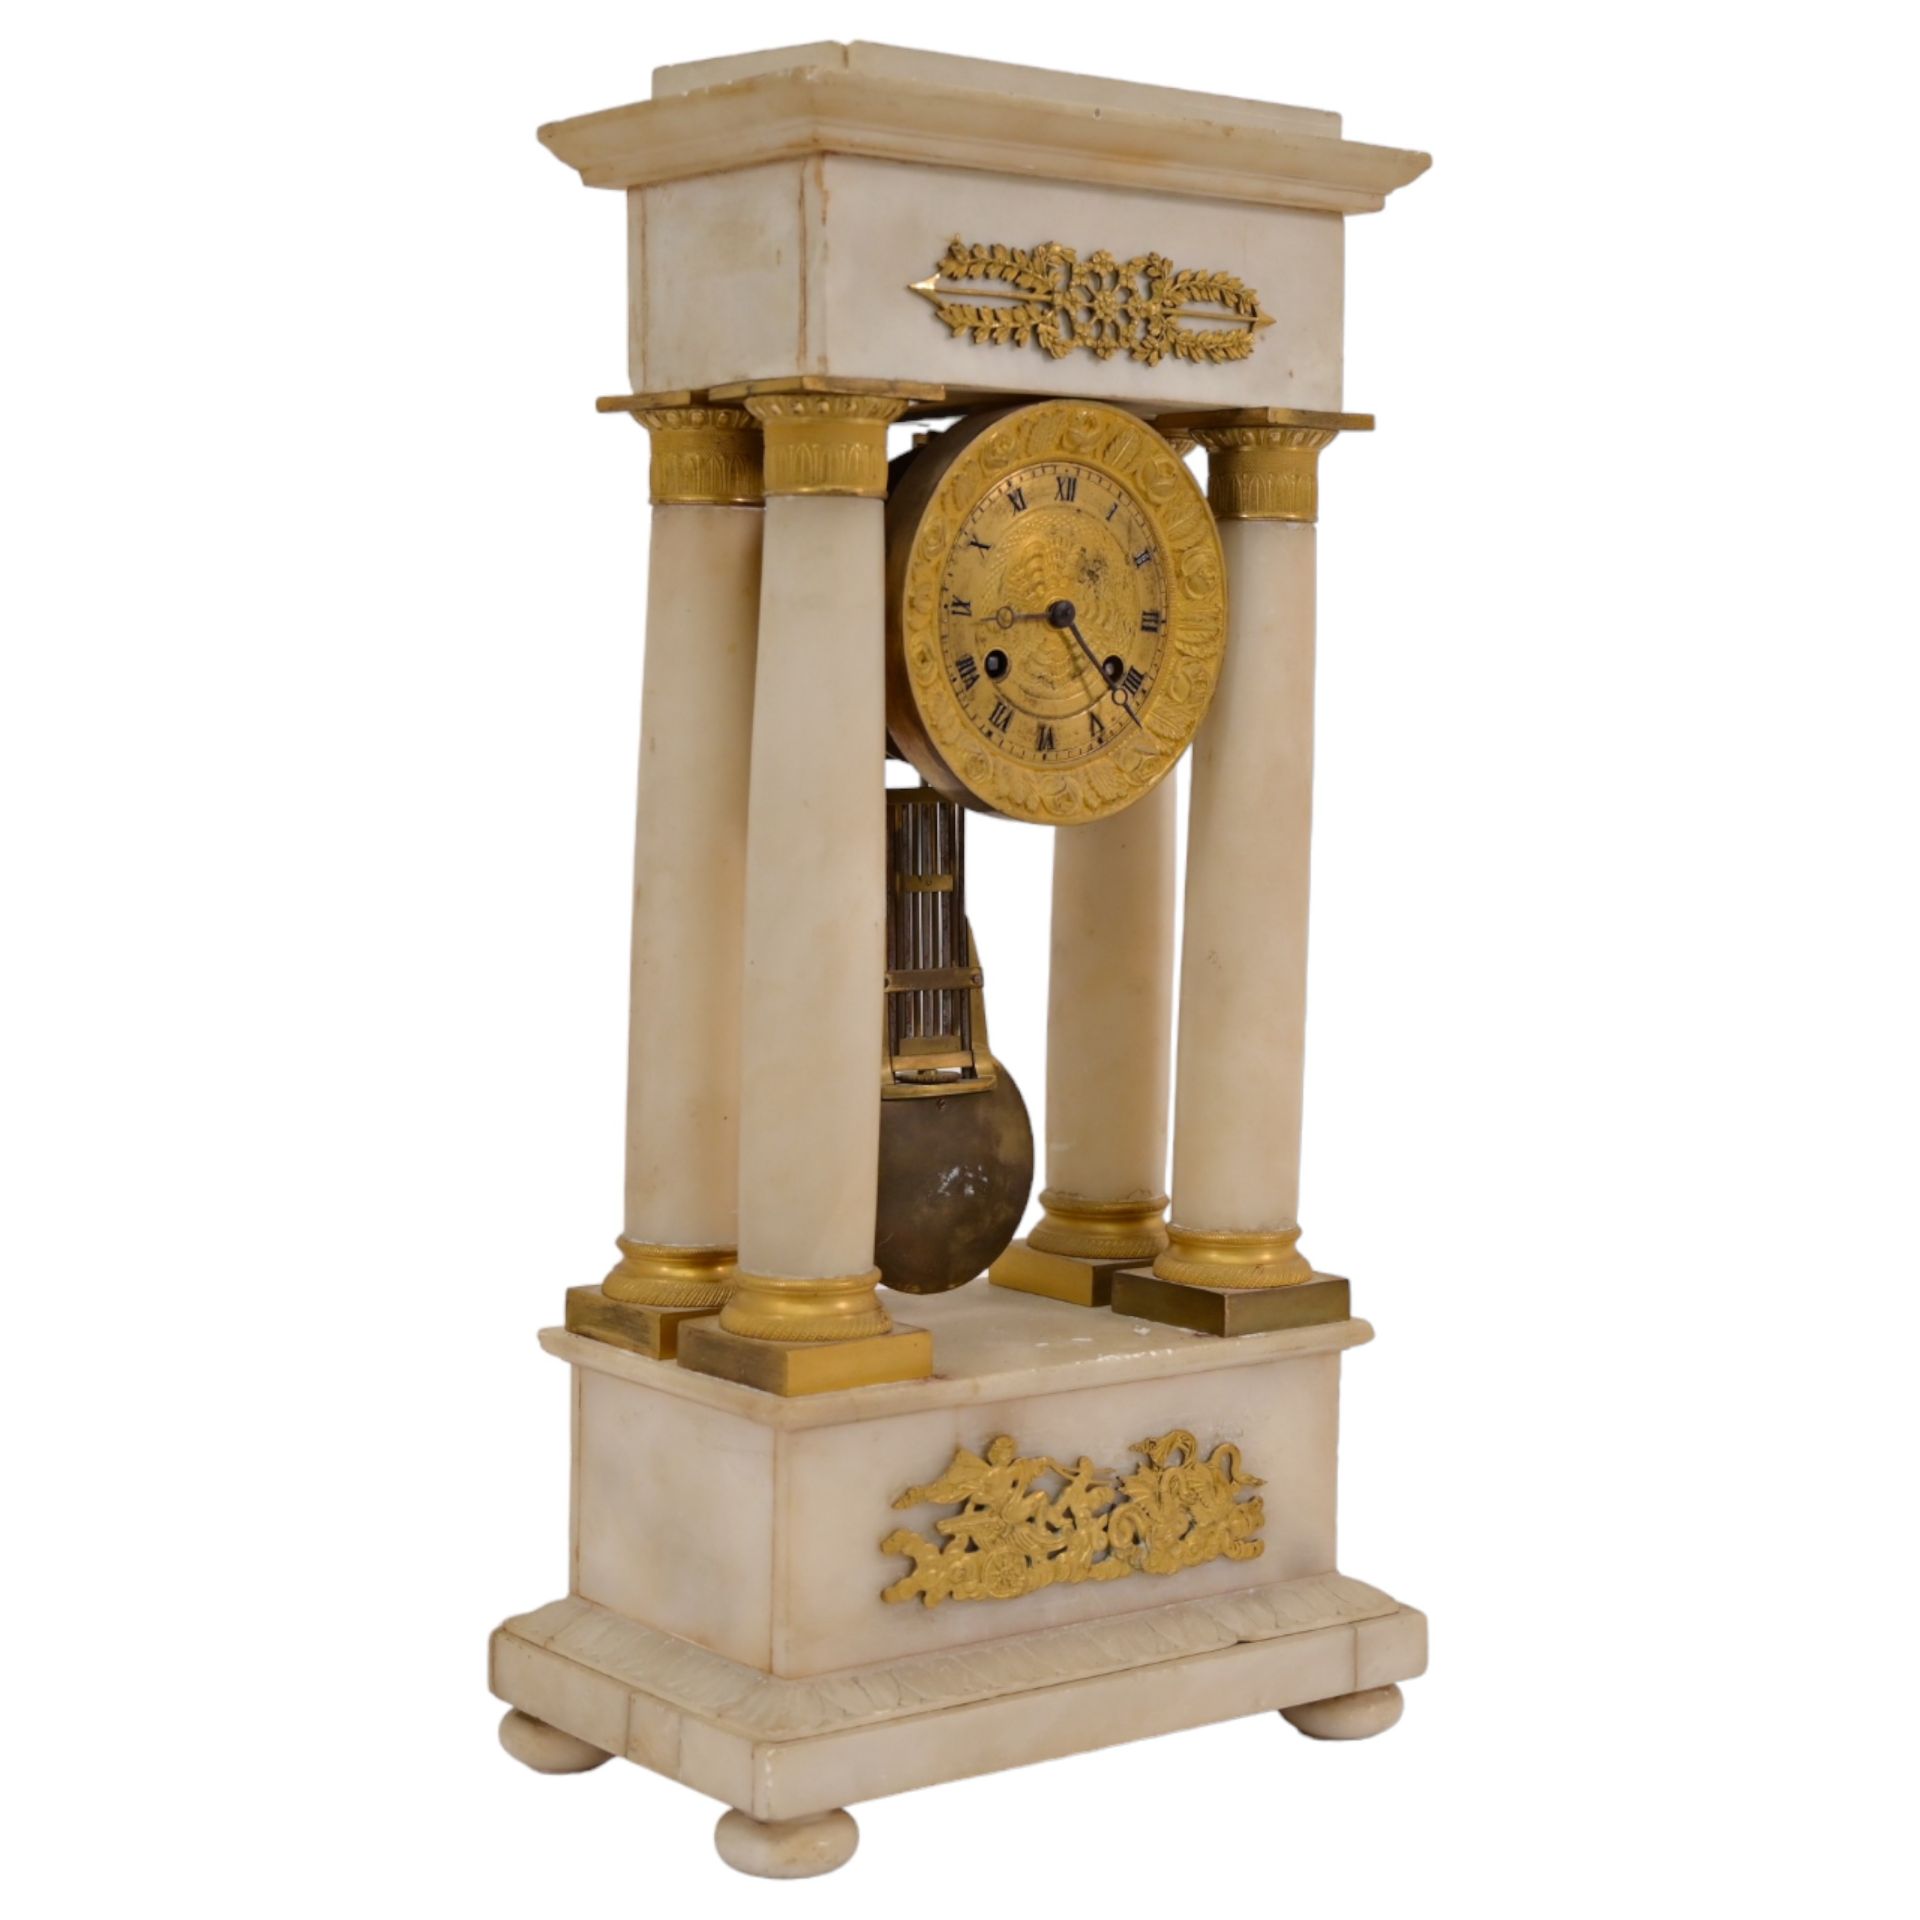 French Empire-Style Alabaster and Gilt-Bronze Portico Clock, mid 19th century. - Image 10 of 10